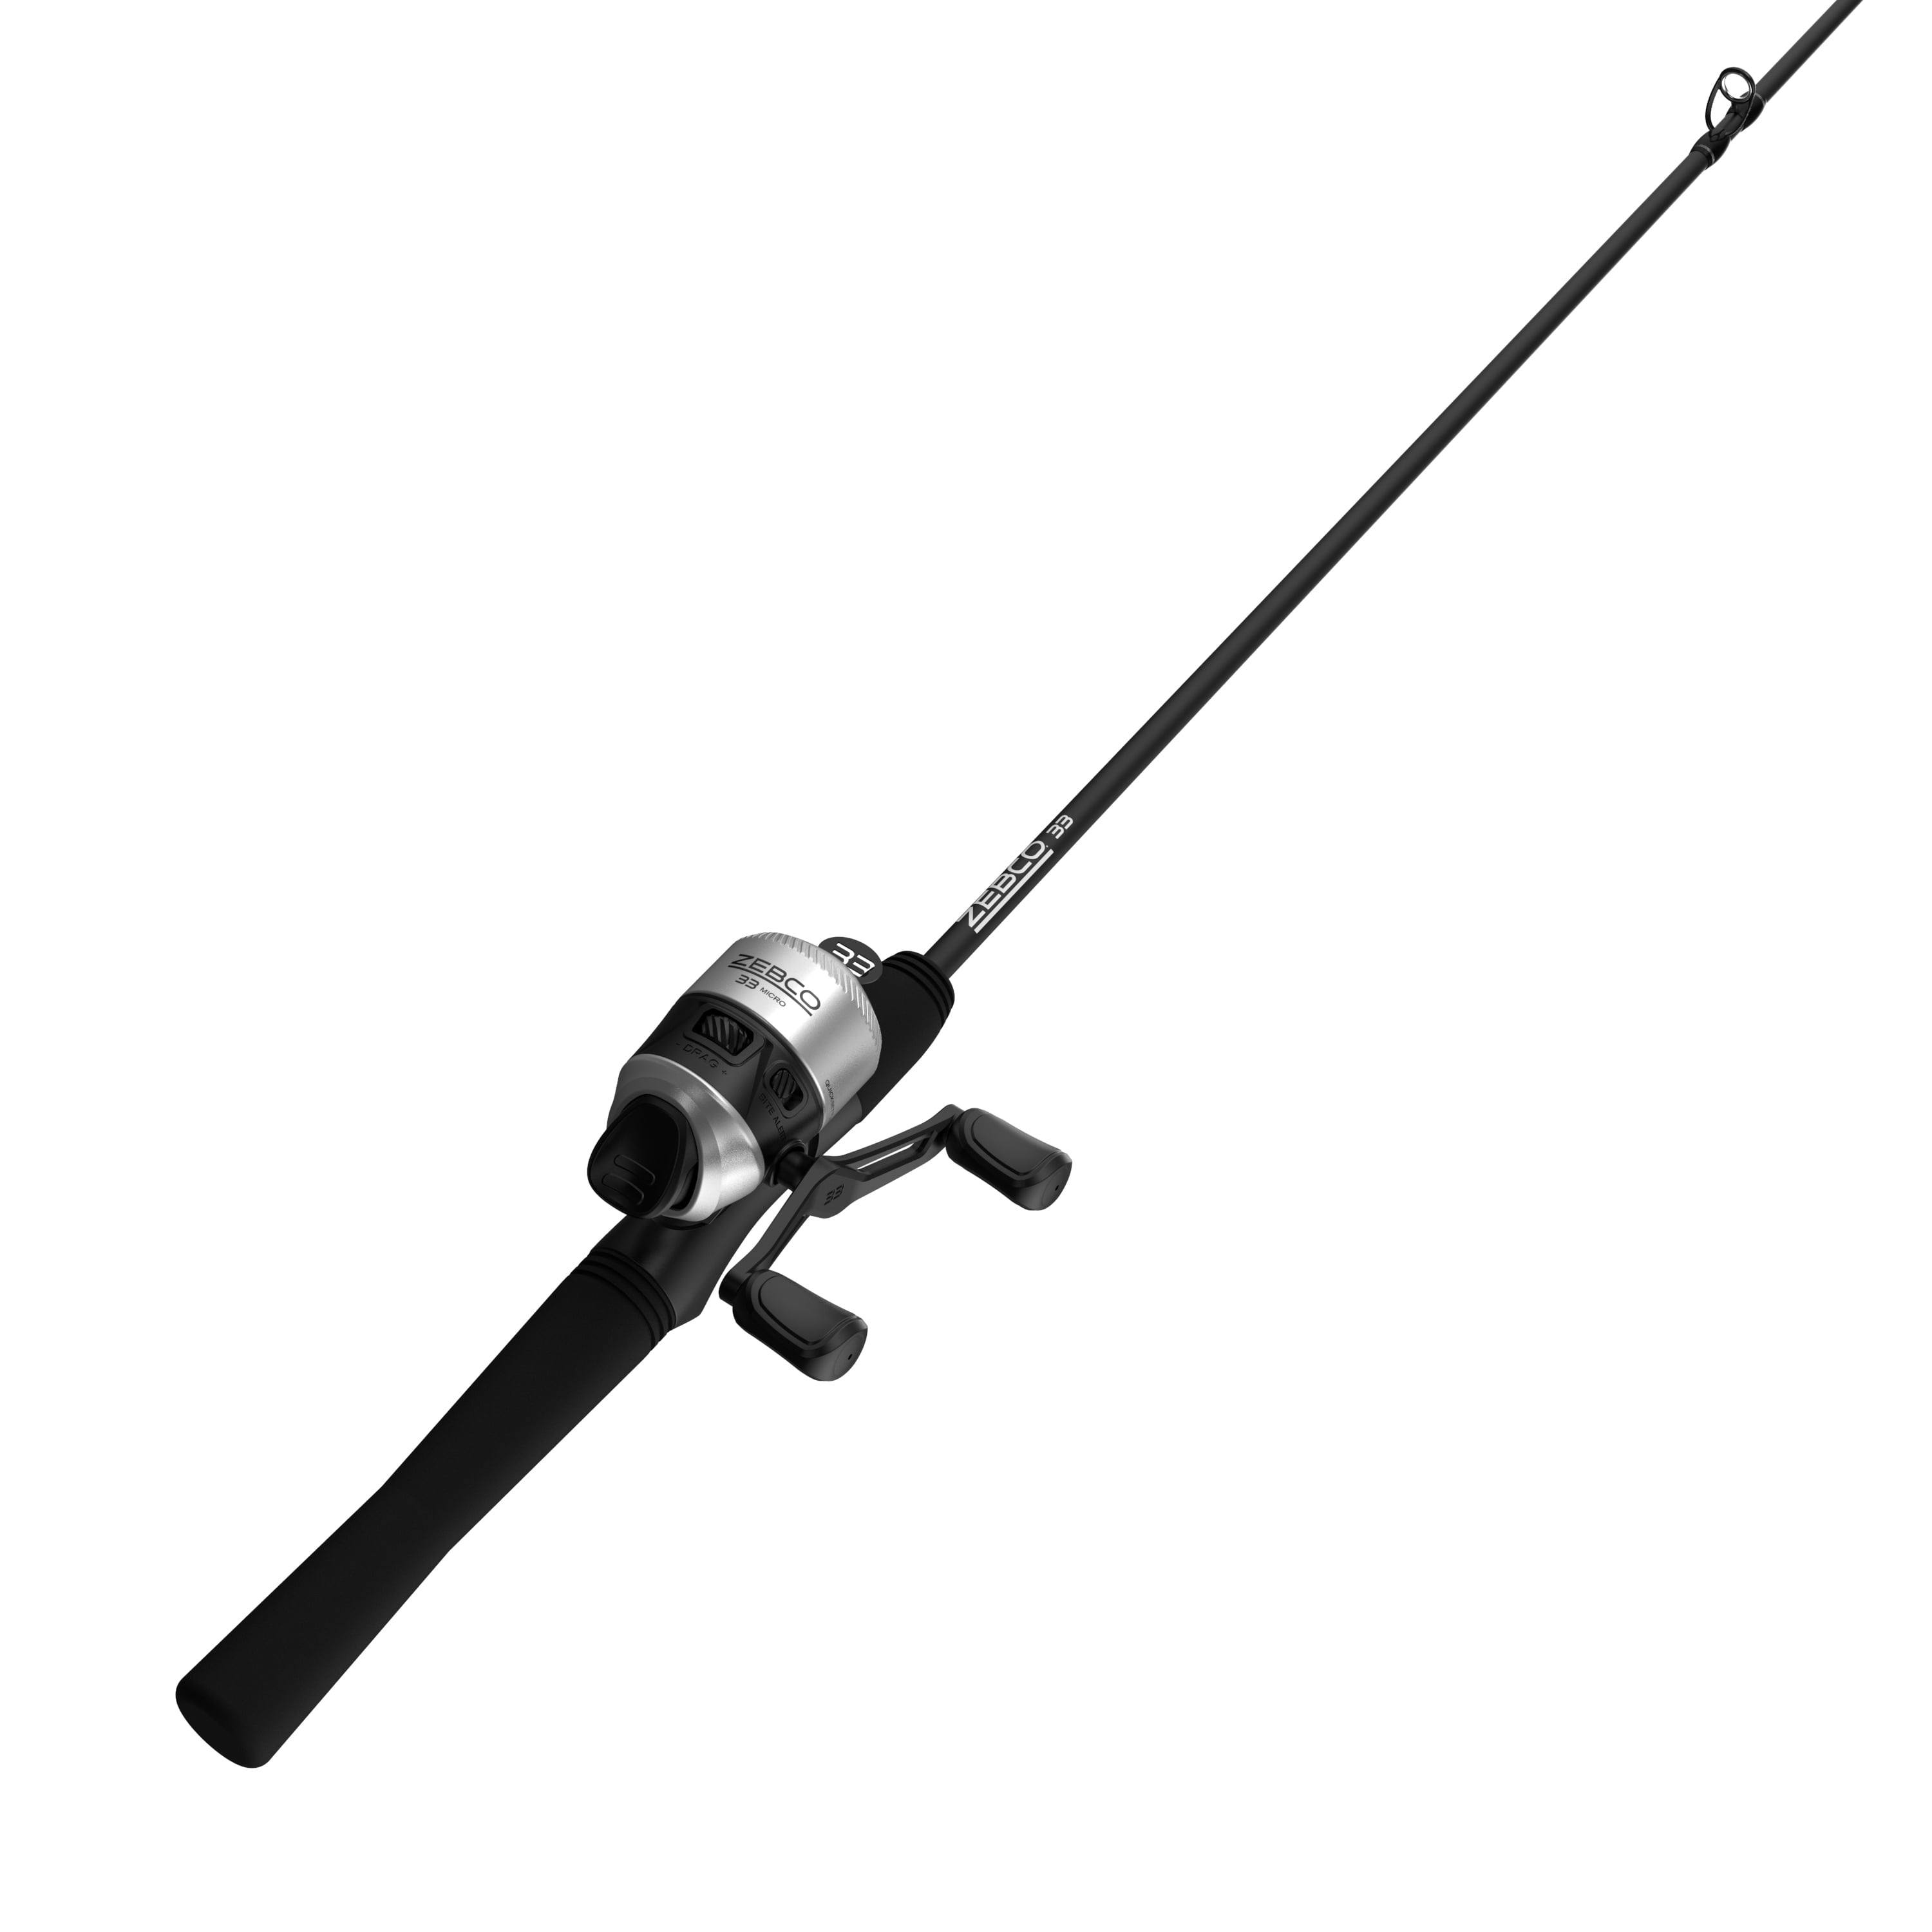 Zebco 33 Micro Spincast Reel and Fishing Rod Combo, 5-Foot 2-Piece 